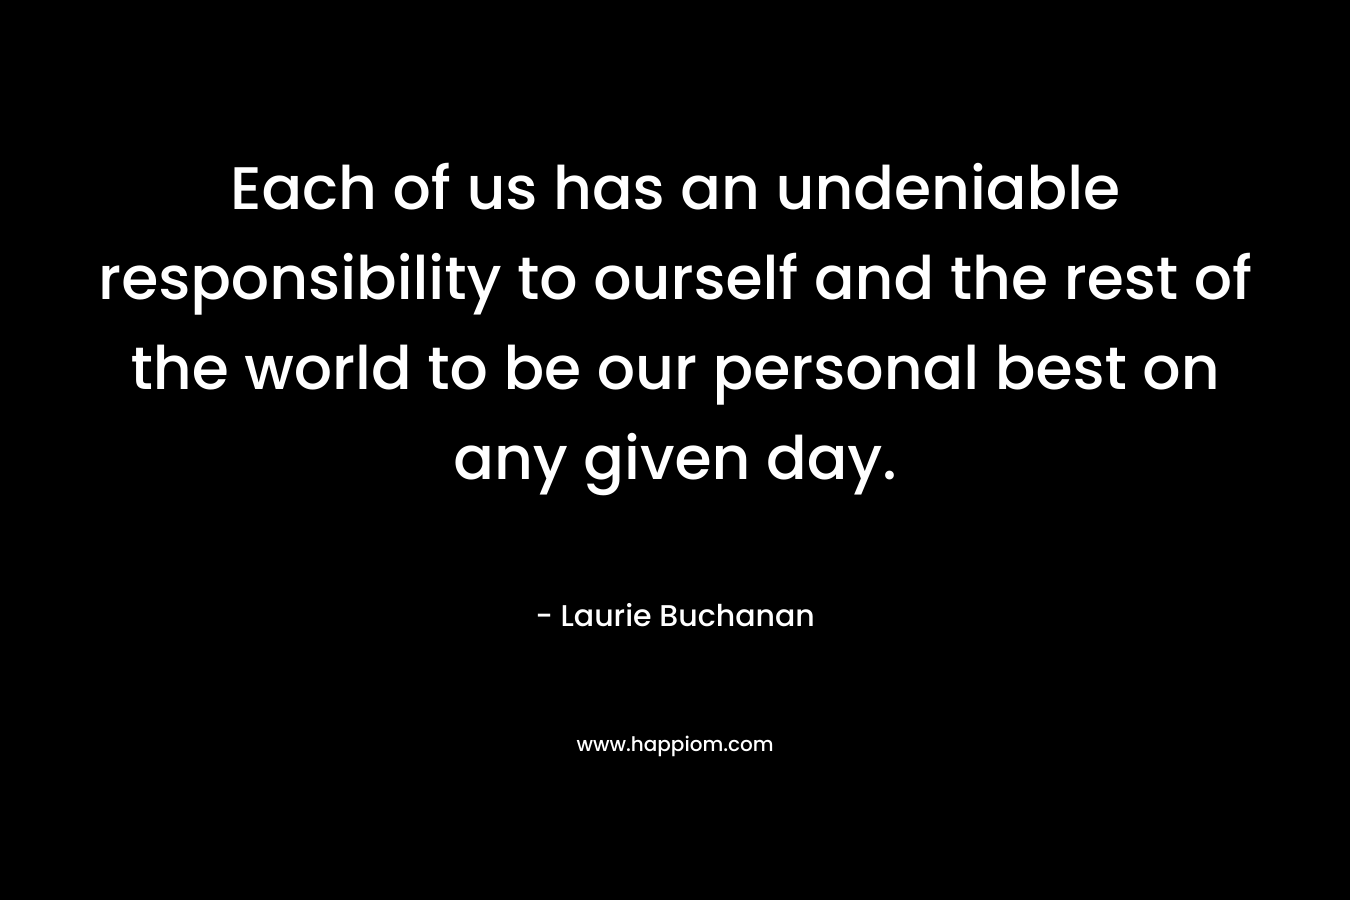 Each of us has an undeniable responsibility to ourself and the rest of the world to be our personal best on any given day.